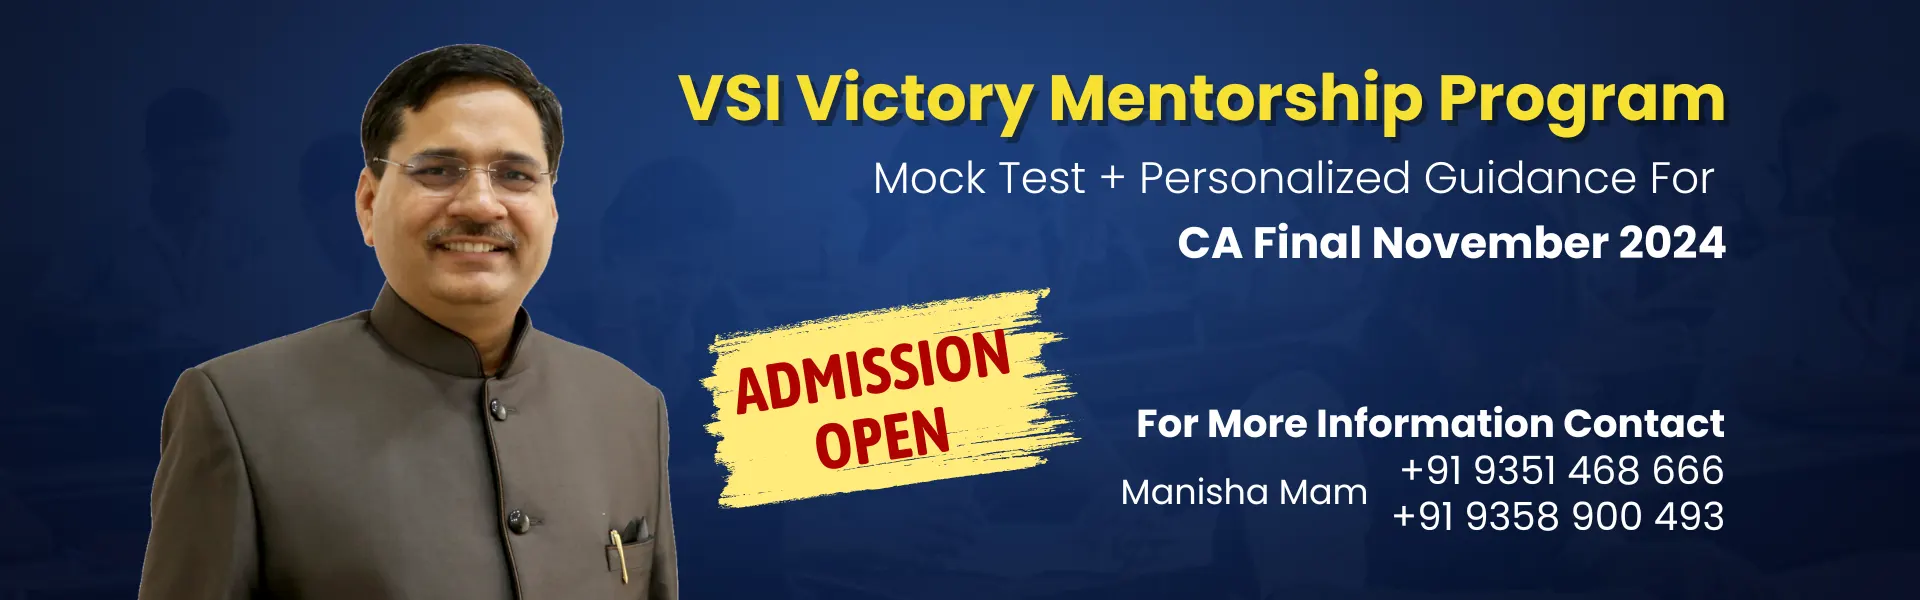 VSI Admission Open VVMP Program for May and Nov 2024 Exams